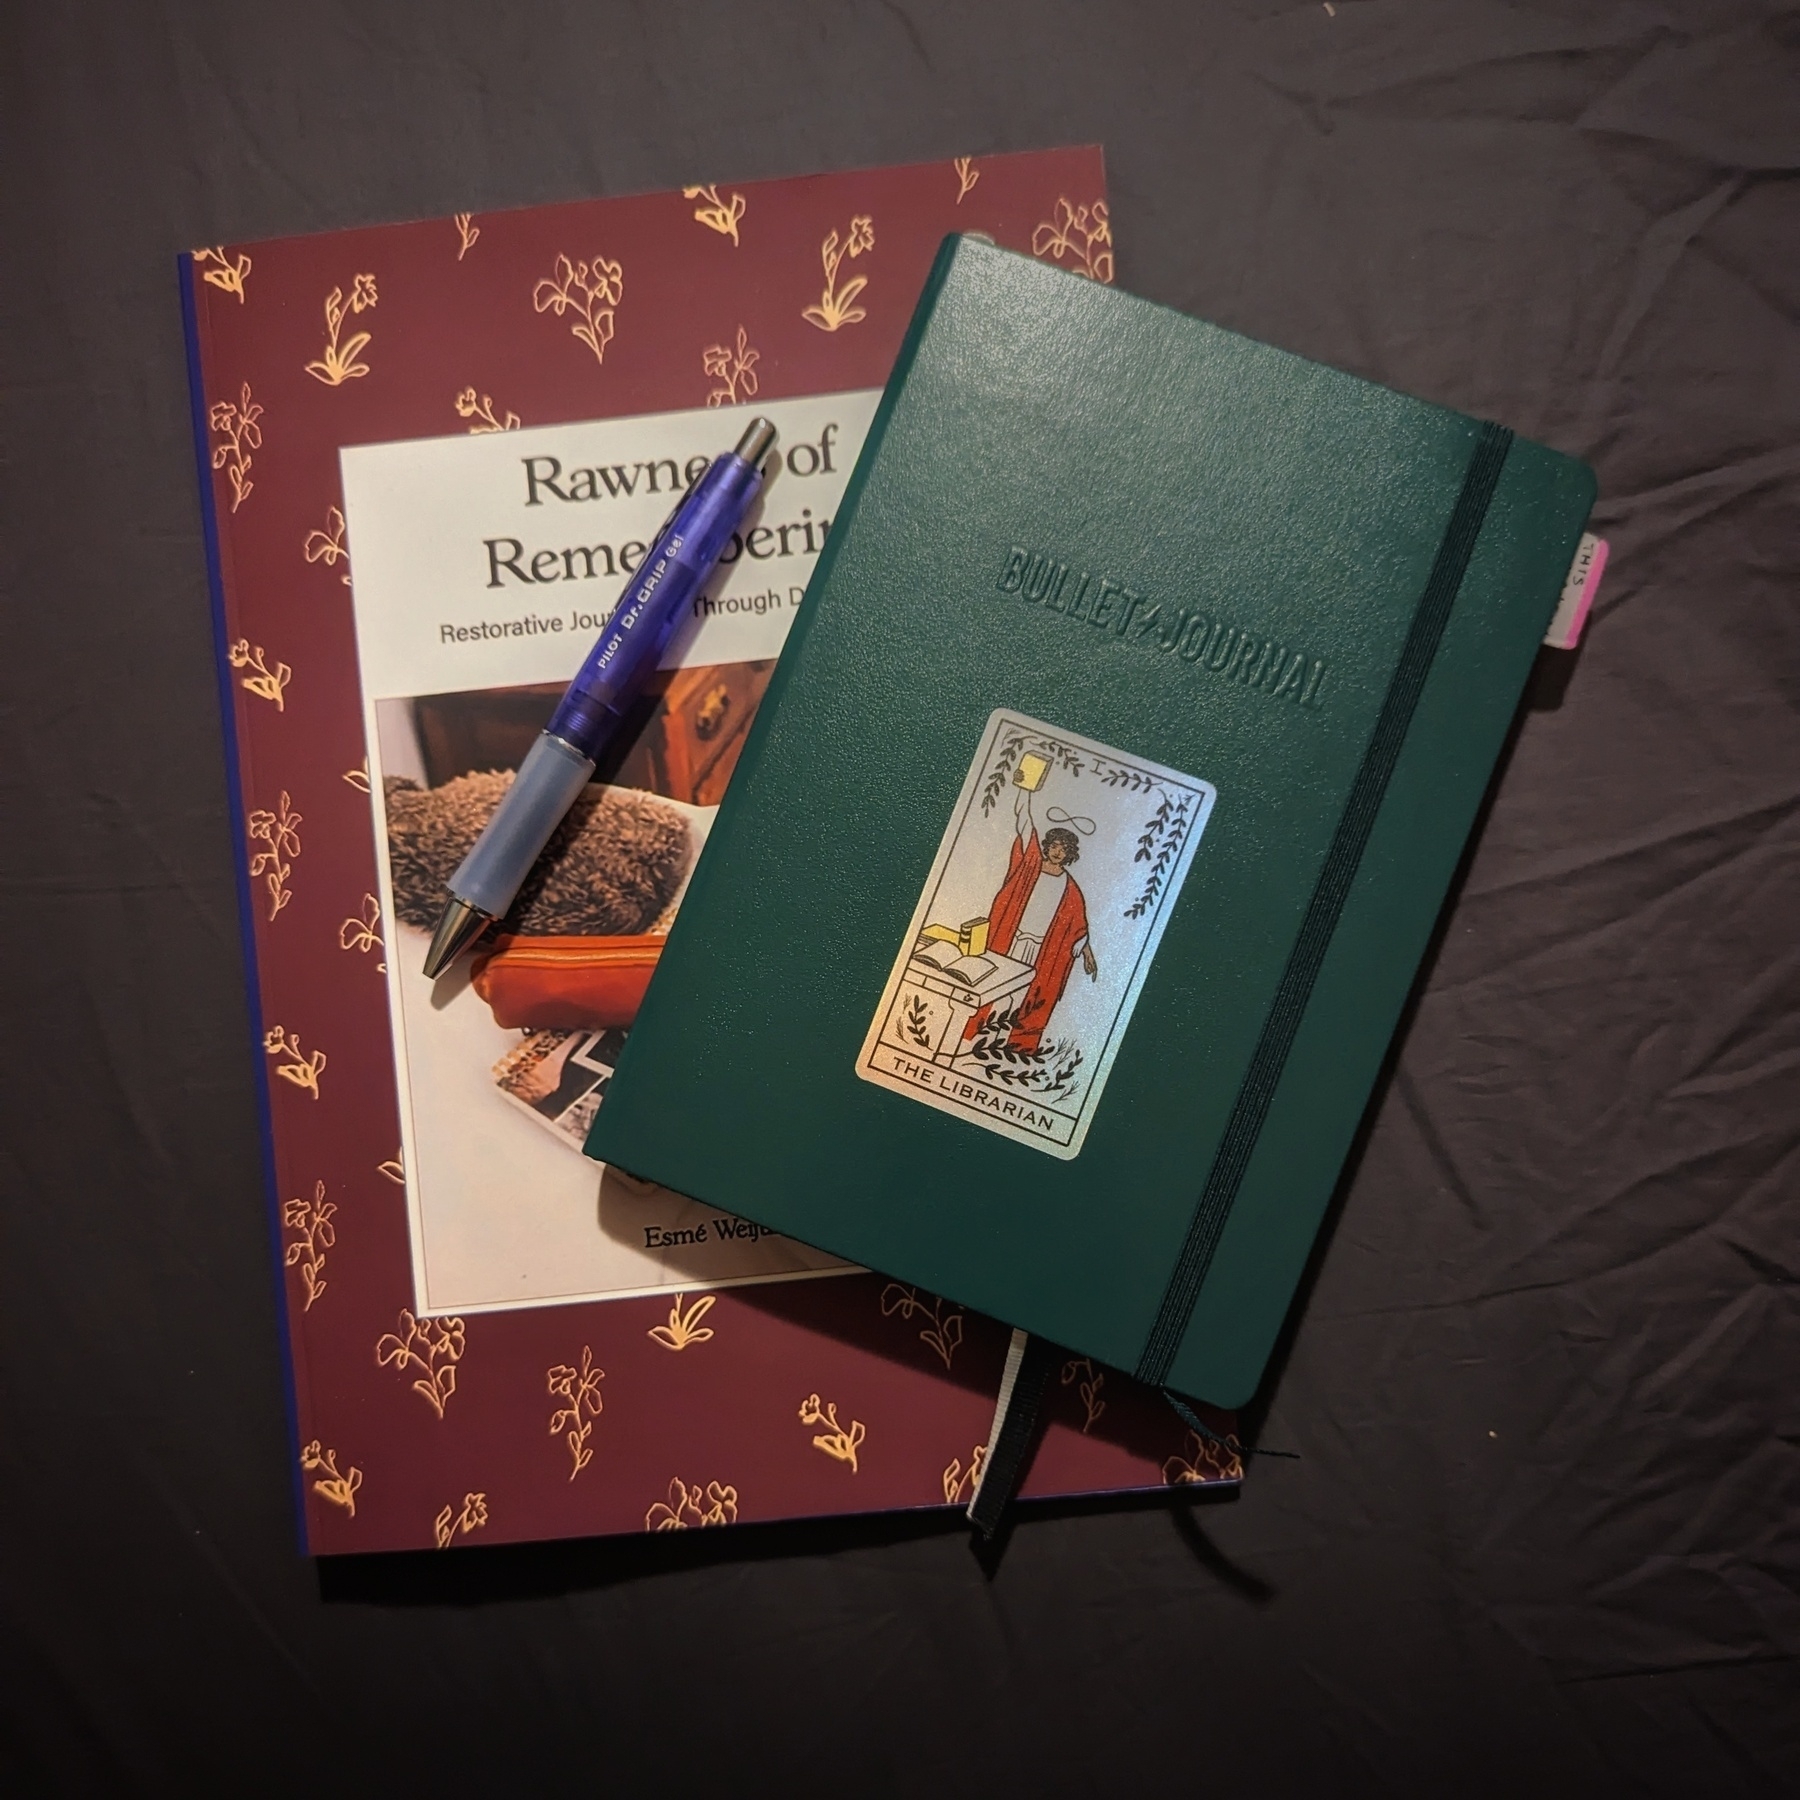 Two books and a pen on a dark surface. One book is titled “Rawness of Remembering: Restorative Journaling through Difficult Times” and has a purple cover with golden designs. The other book is a green bullet journal with a Librarian Tarot card sticker. A purple pen rests on the purple book.